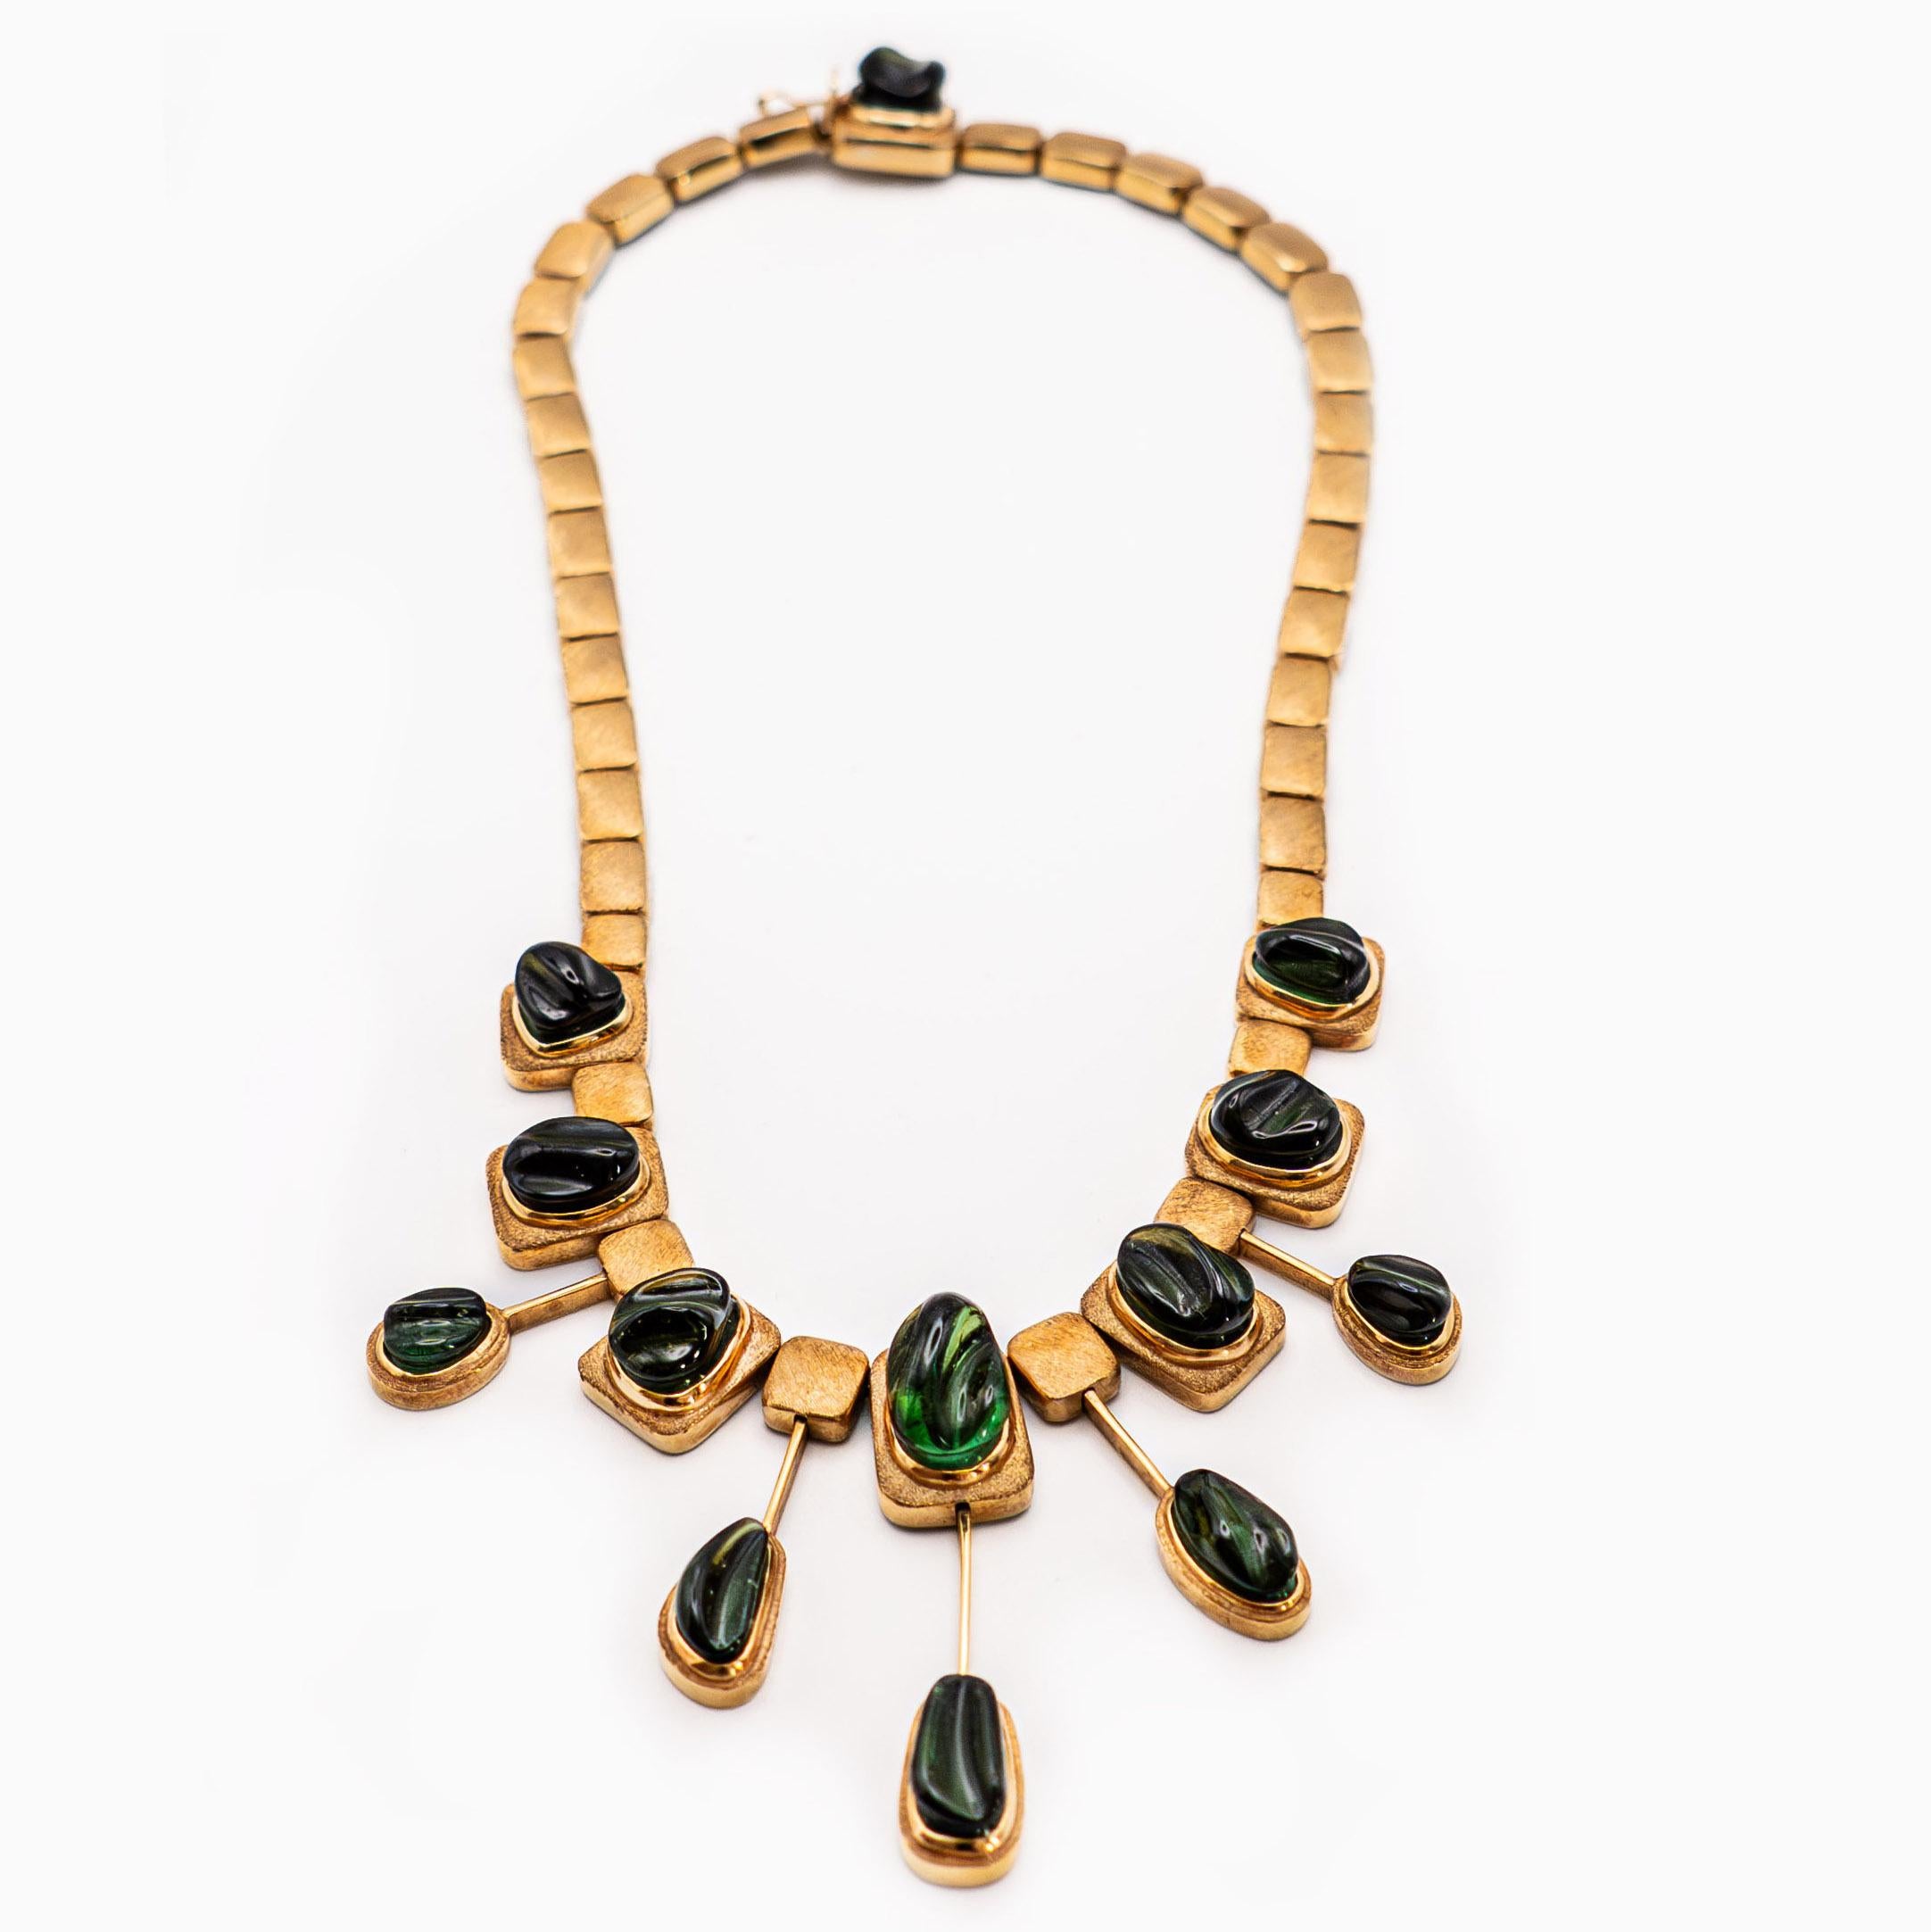 Description: An extraordinary modernist fringe necklace Forma Livre Carved Green Necklace -Handmade- Green Tourmalines, 18K Gold. Weight: 81.2 gr. Approximate Total Gemstone Weight: 57.58 cts. Circa: 1965

The tourmalines in this necklace are of the